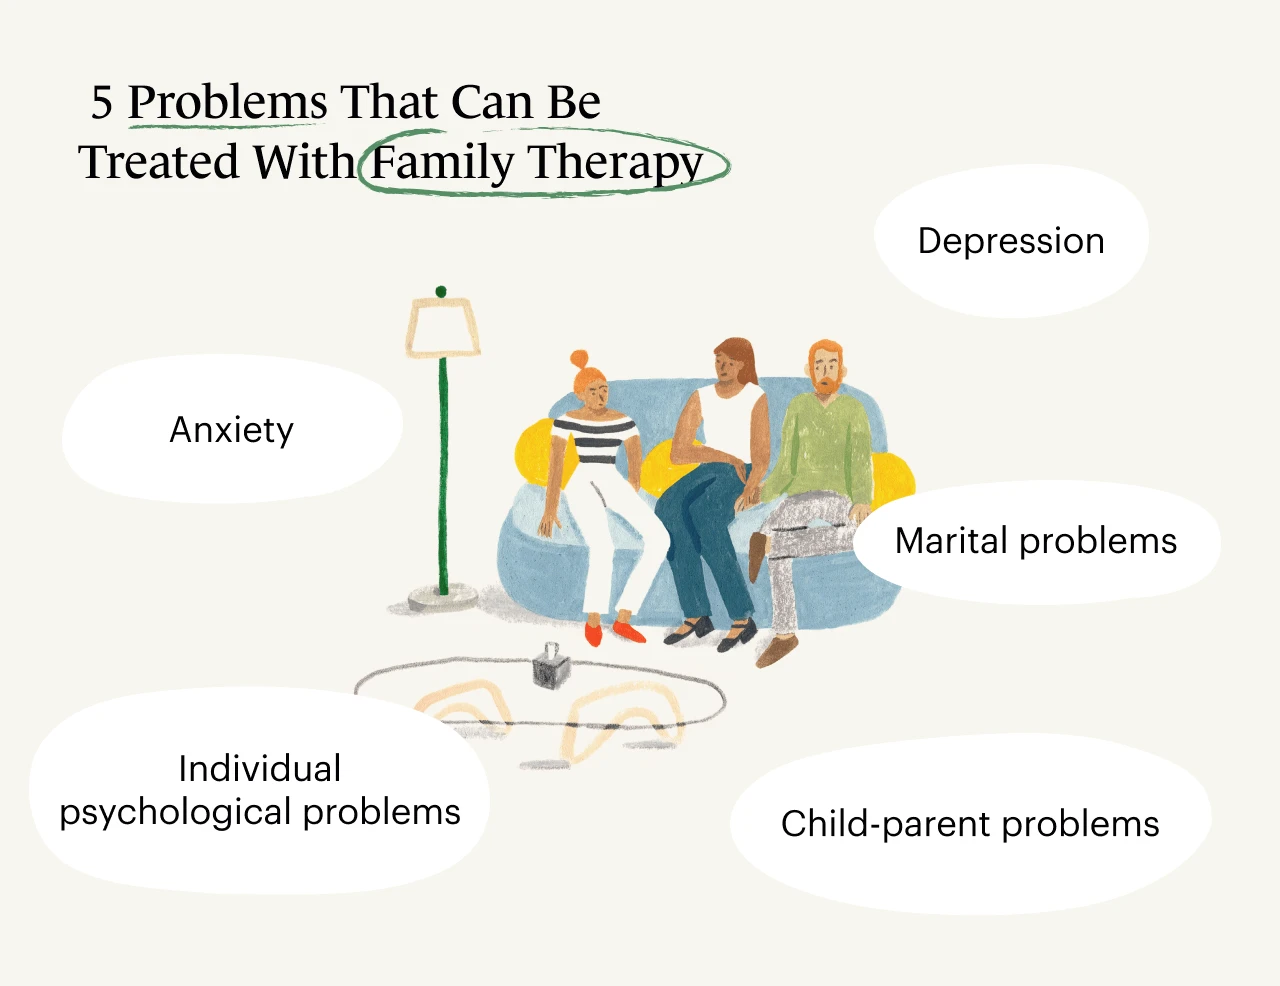 A Monarch original infographic showing 5 types of problems that  family therapy helps address.